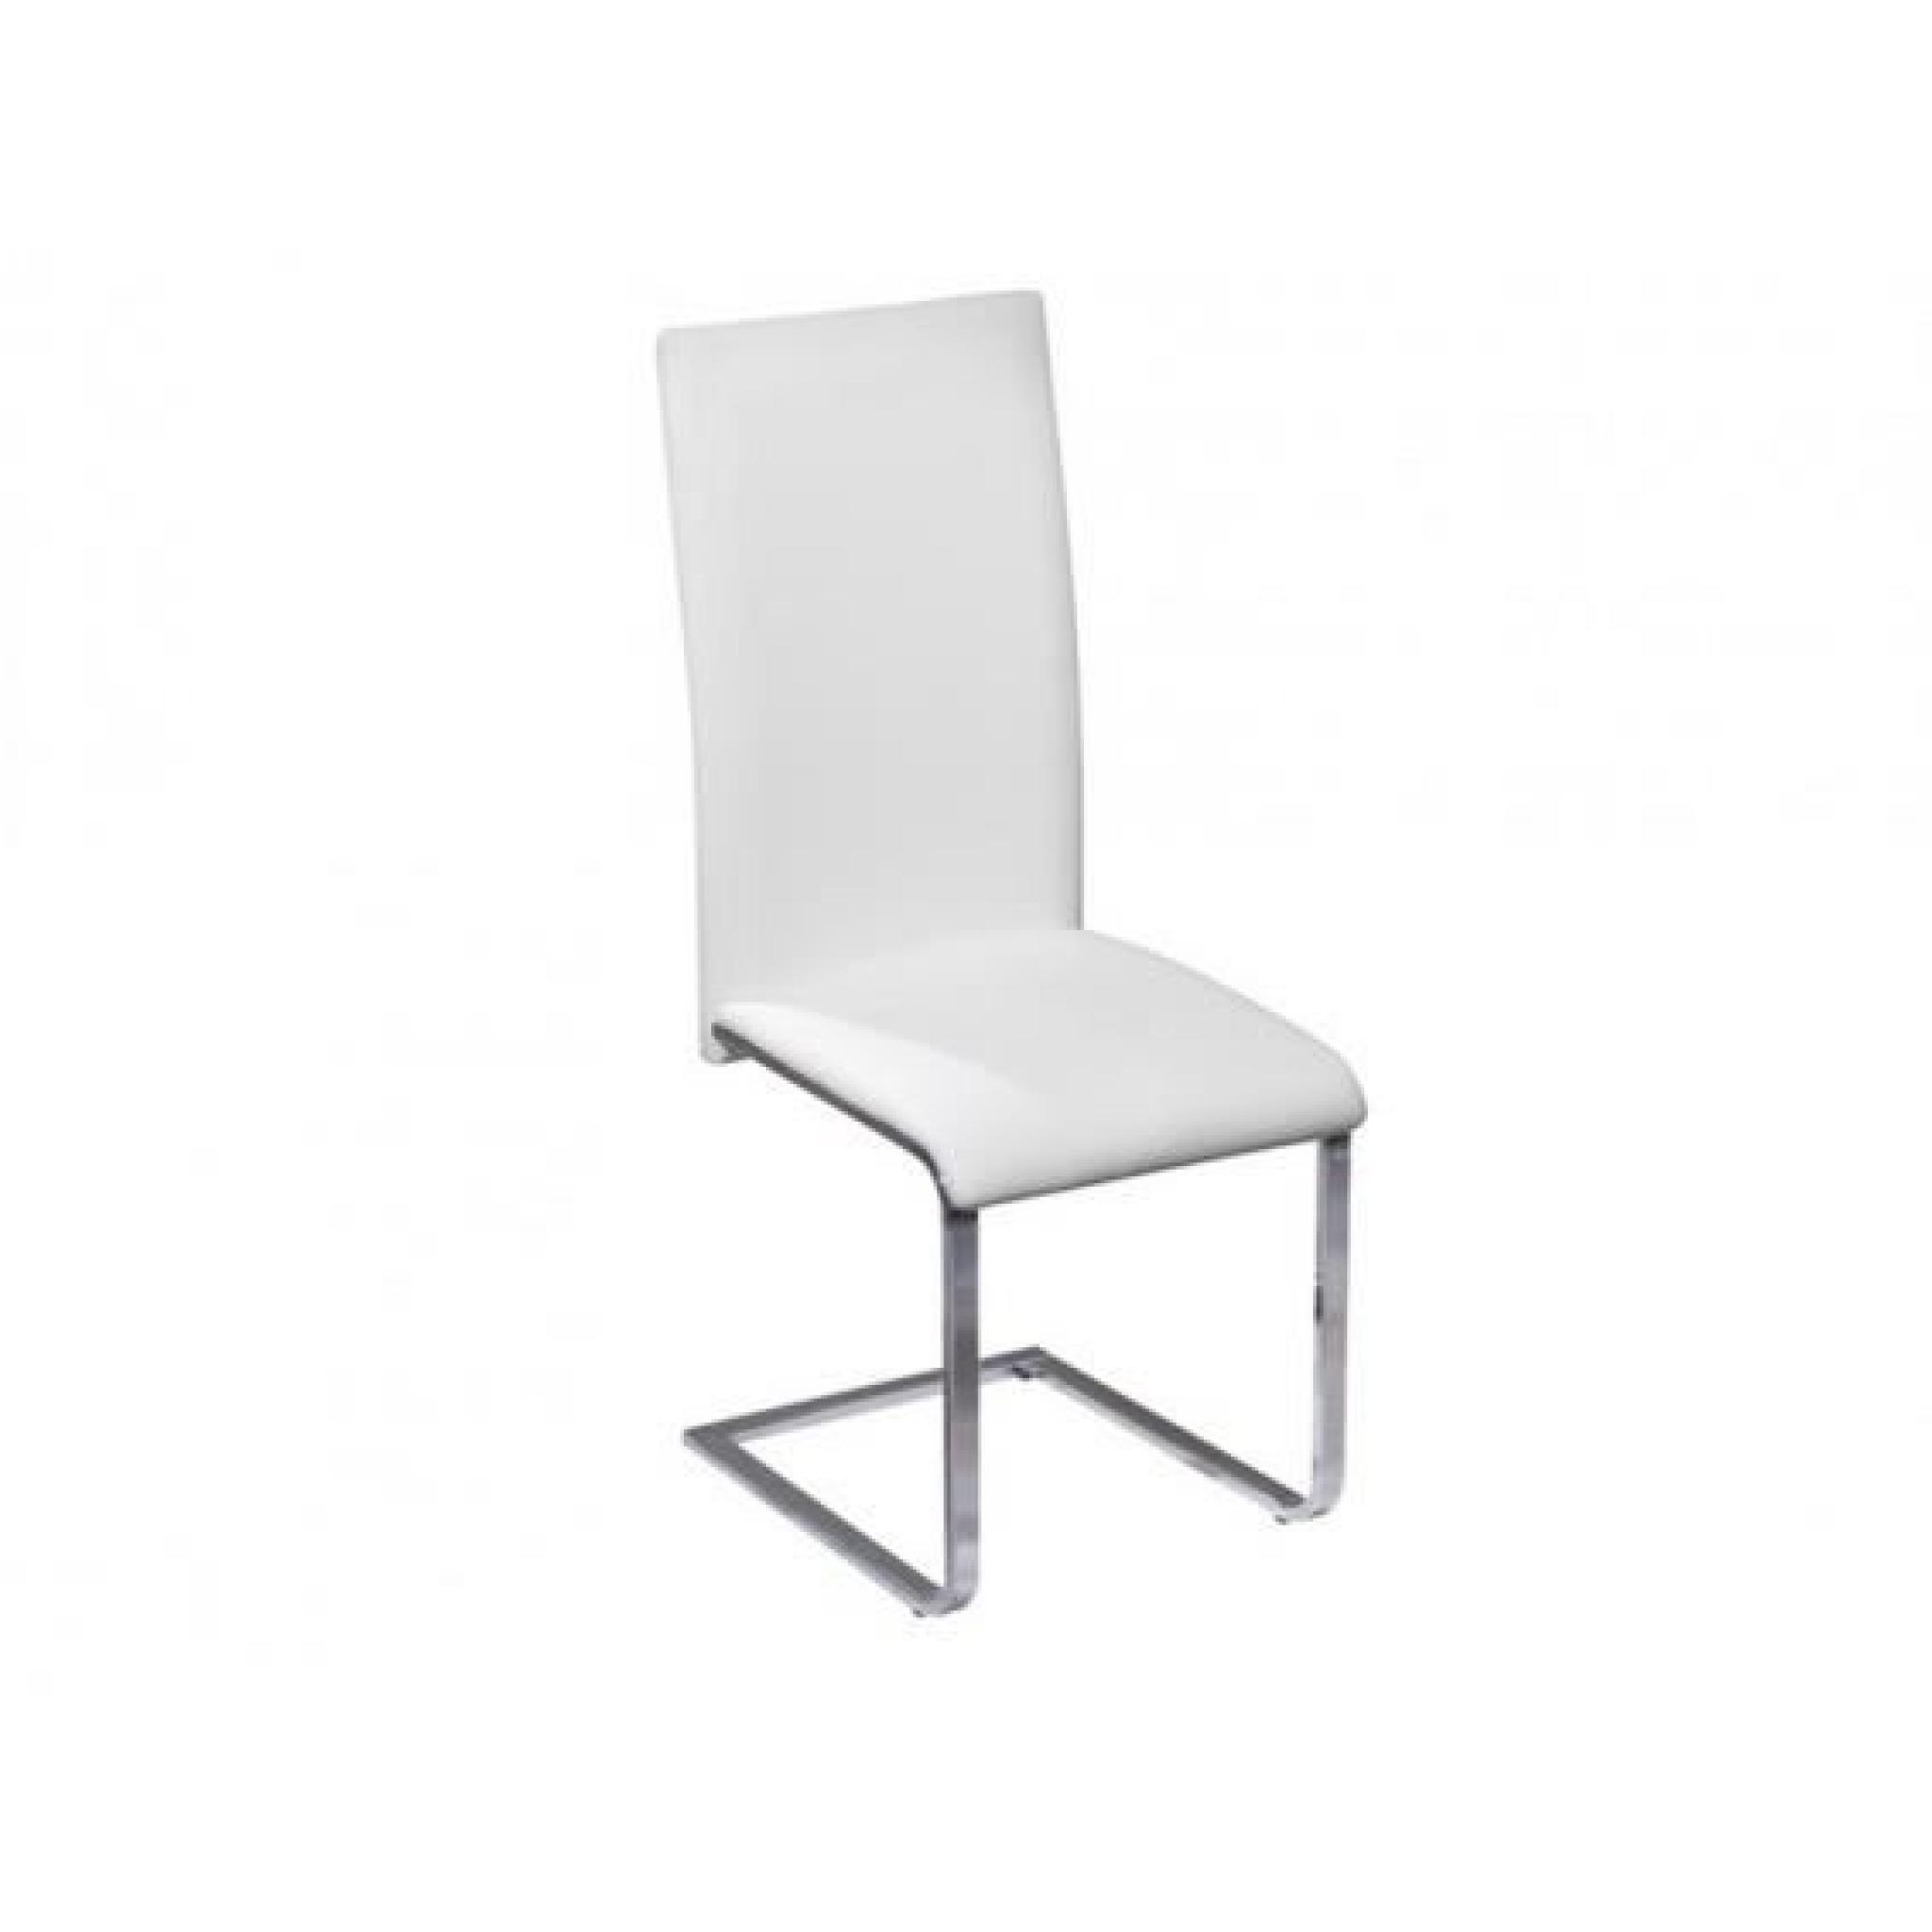 Brooklyn - Lot 6 Chaises Blanches pas cher